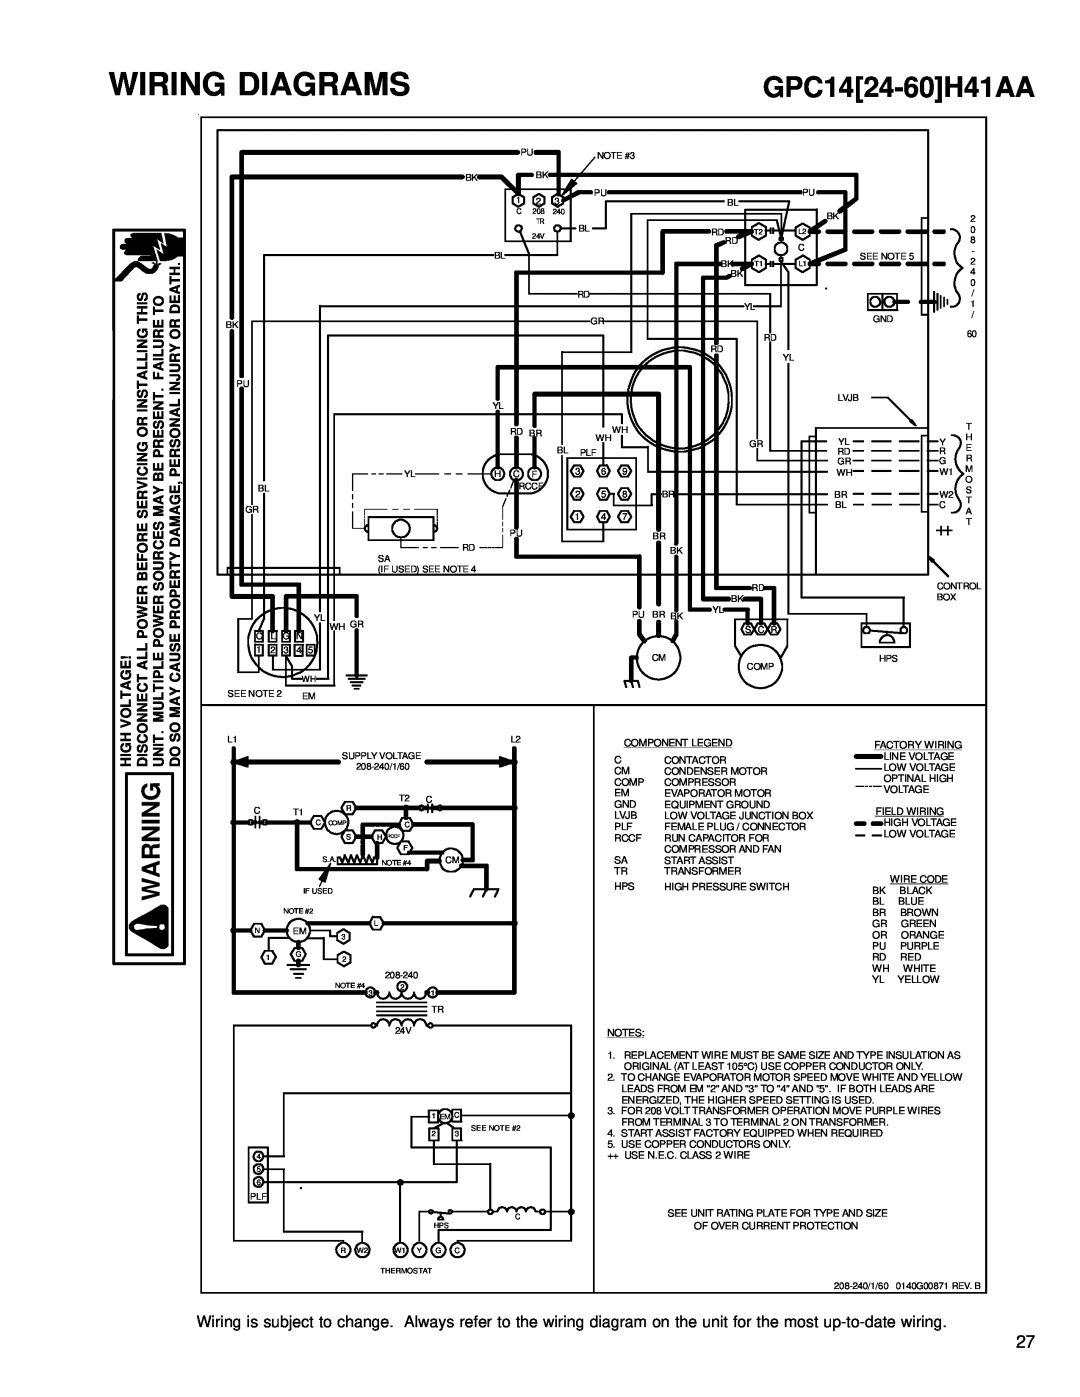 Goodman Mfg GPC 14 SEER R-410 Package Air Conditioners with R-410A, RS6300011 Wiring Diagrams, GPC1424-60H41AA 